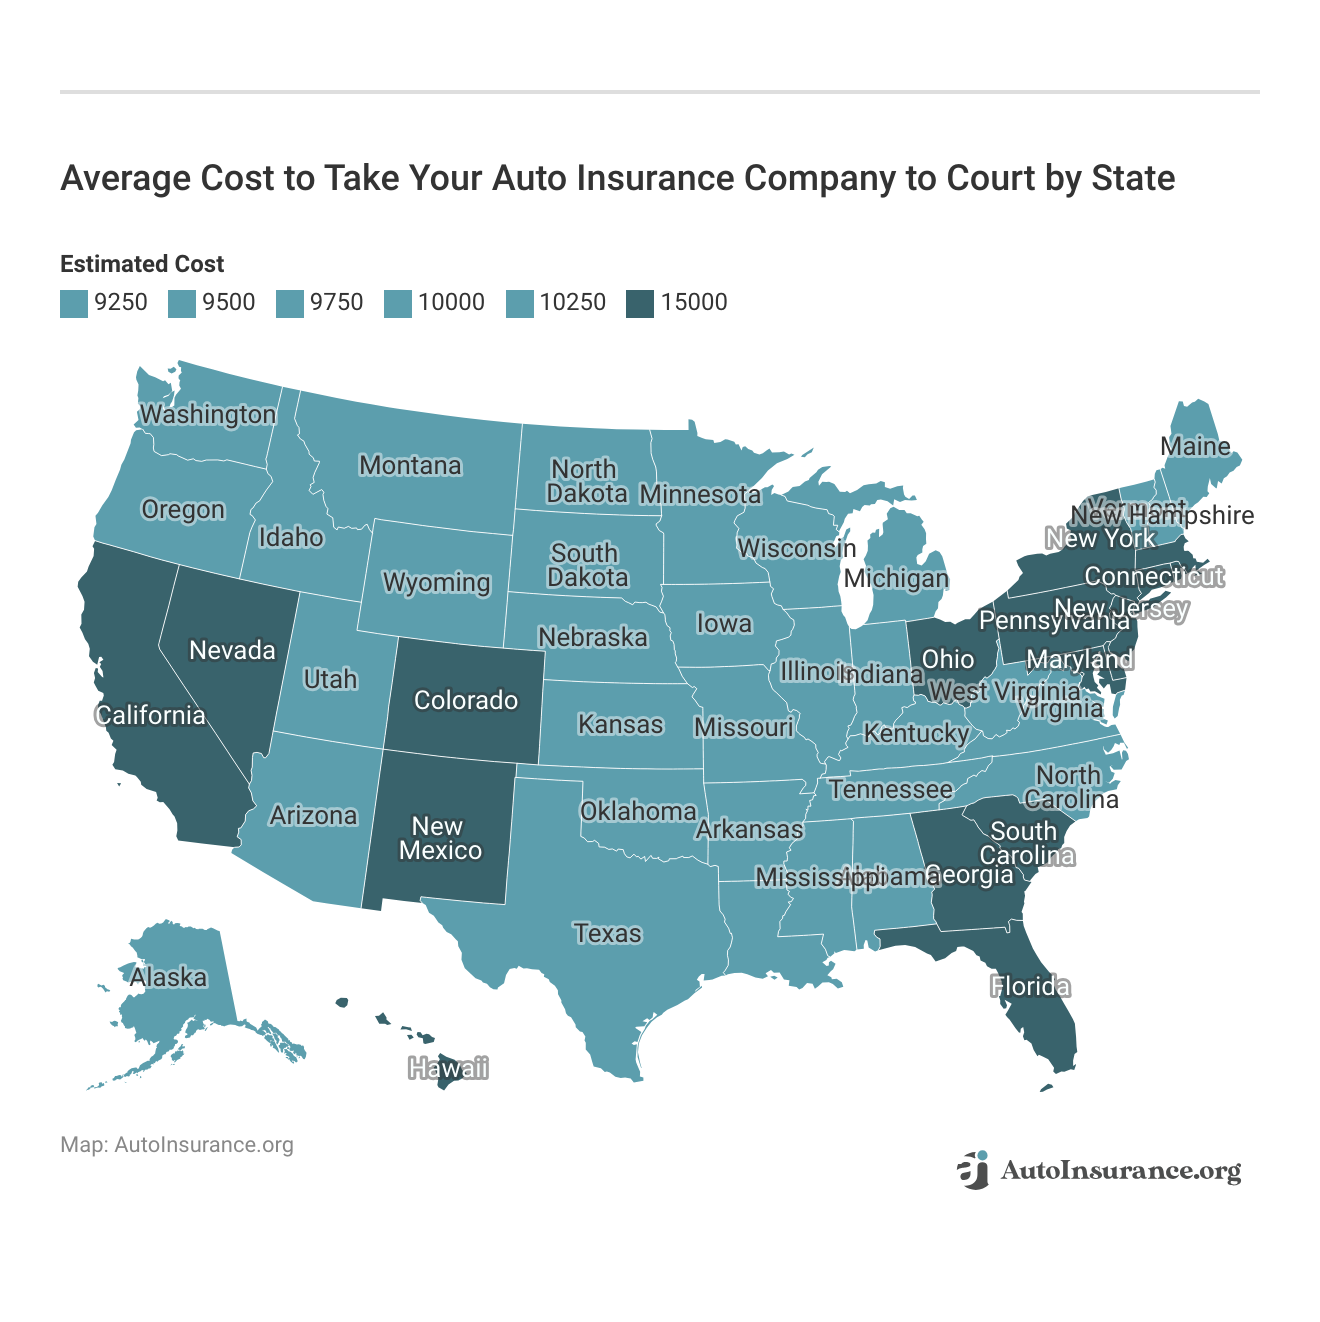 <h3>Average Cost to Take Your Auto Insurance Company to Court by State</h3>